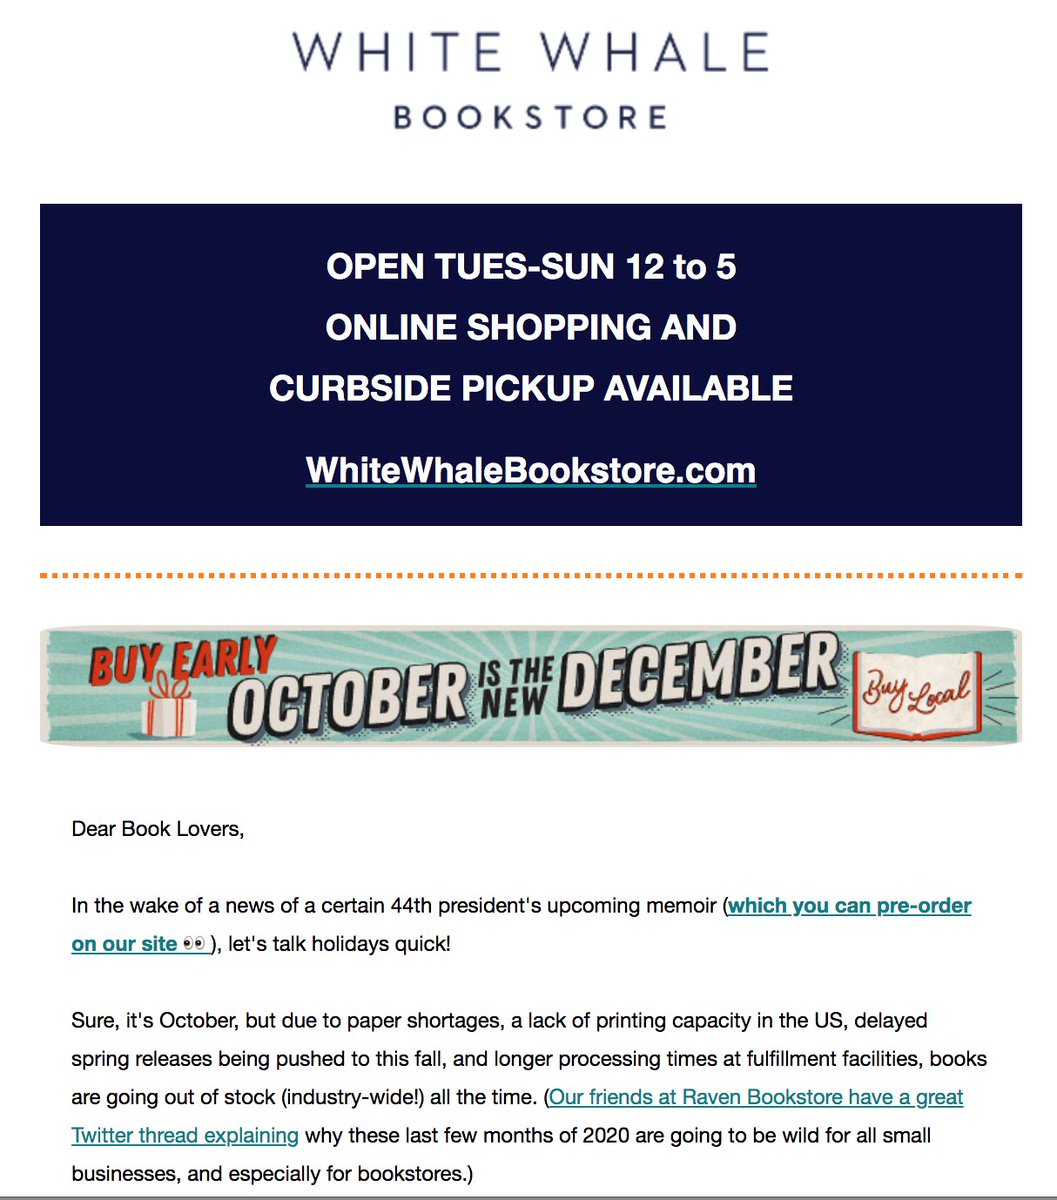 October newsletter is live! Most importantly: October is the new December. Plan and order presents now (today!) Books are going out of stock all the time, and we want to make sure you get the book you desire (for yourself or others, we don't judge). 1/12 https://mailchi.mp/e2da61d46193/febatww-3313350